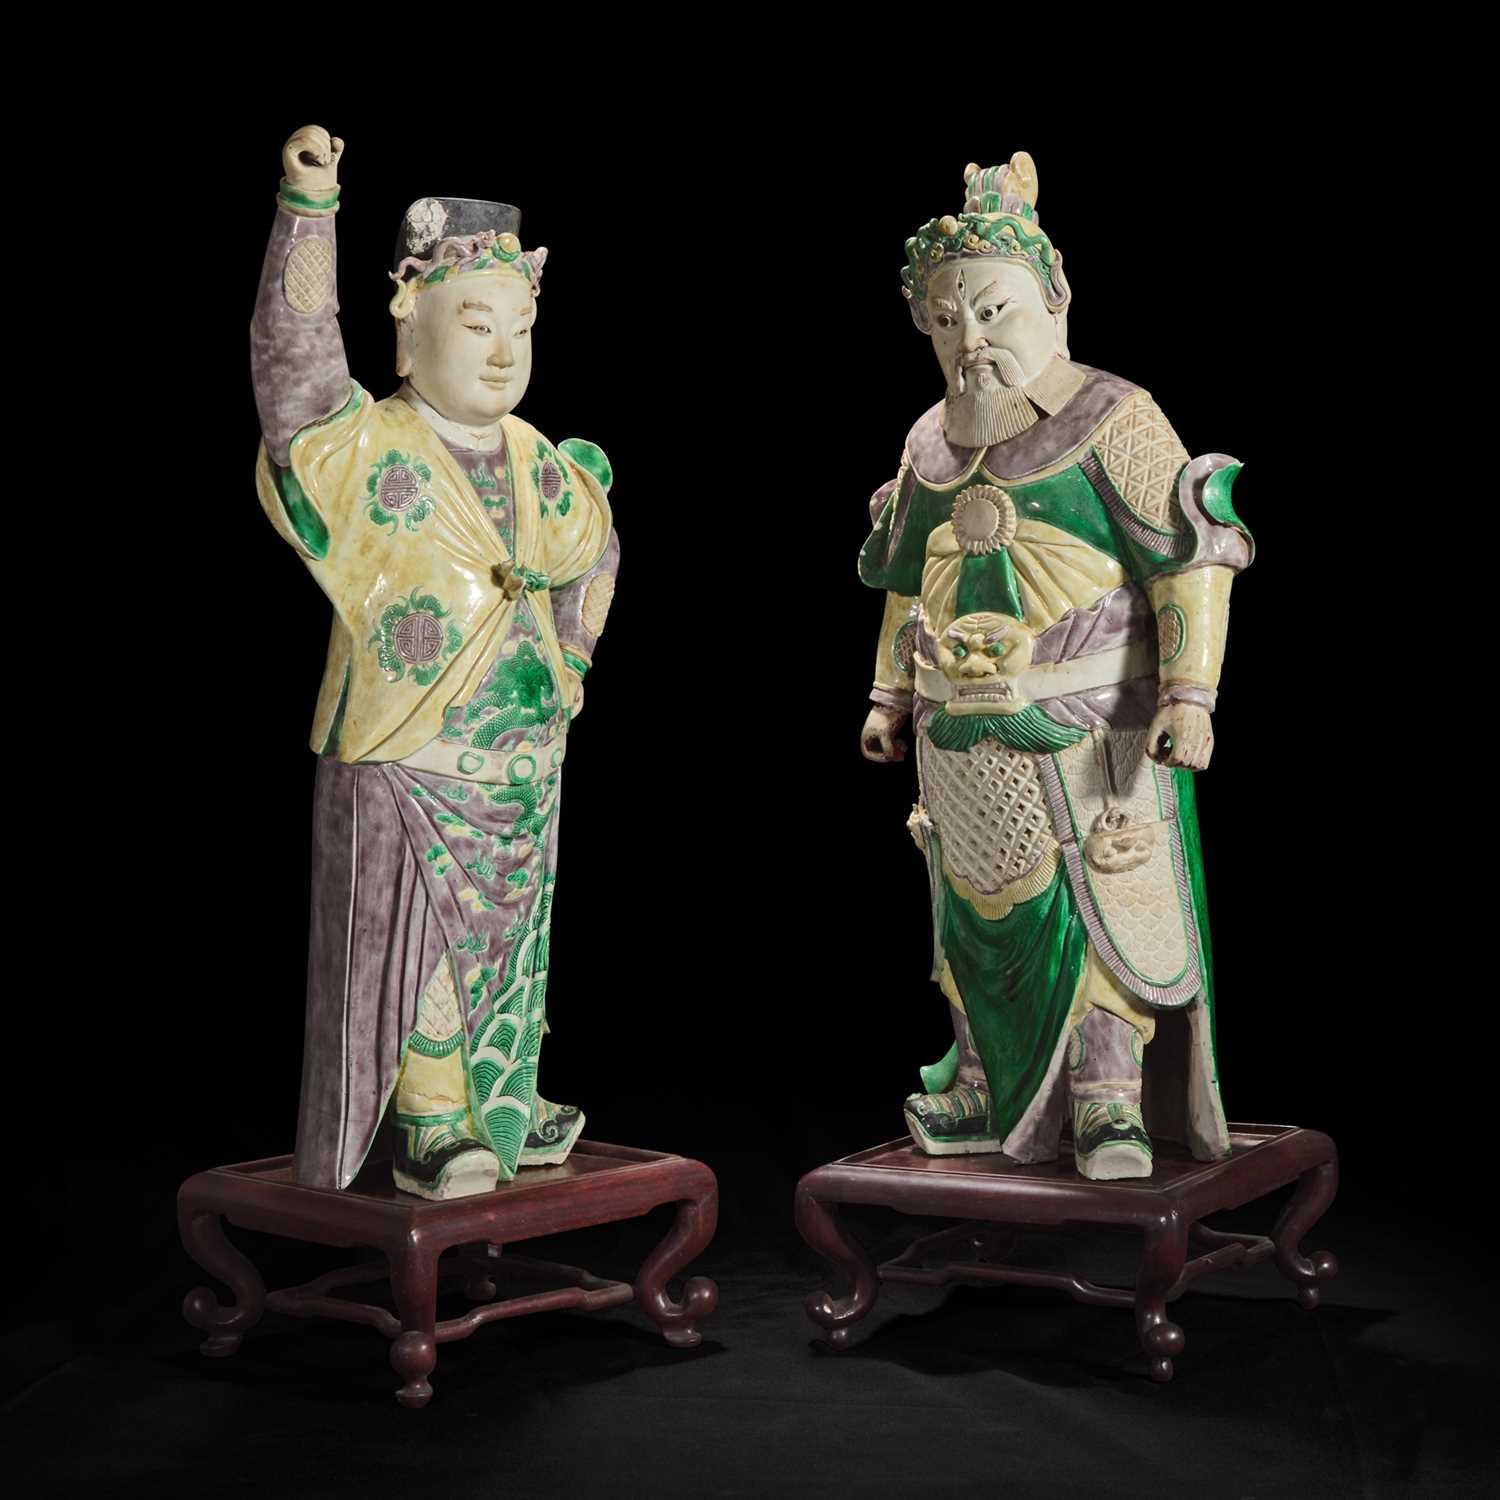 Lot 92 - An unusual pair of large Chinese famille-verte decorated porcelain guardians 五彩门神一对